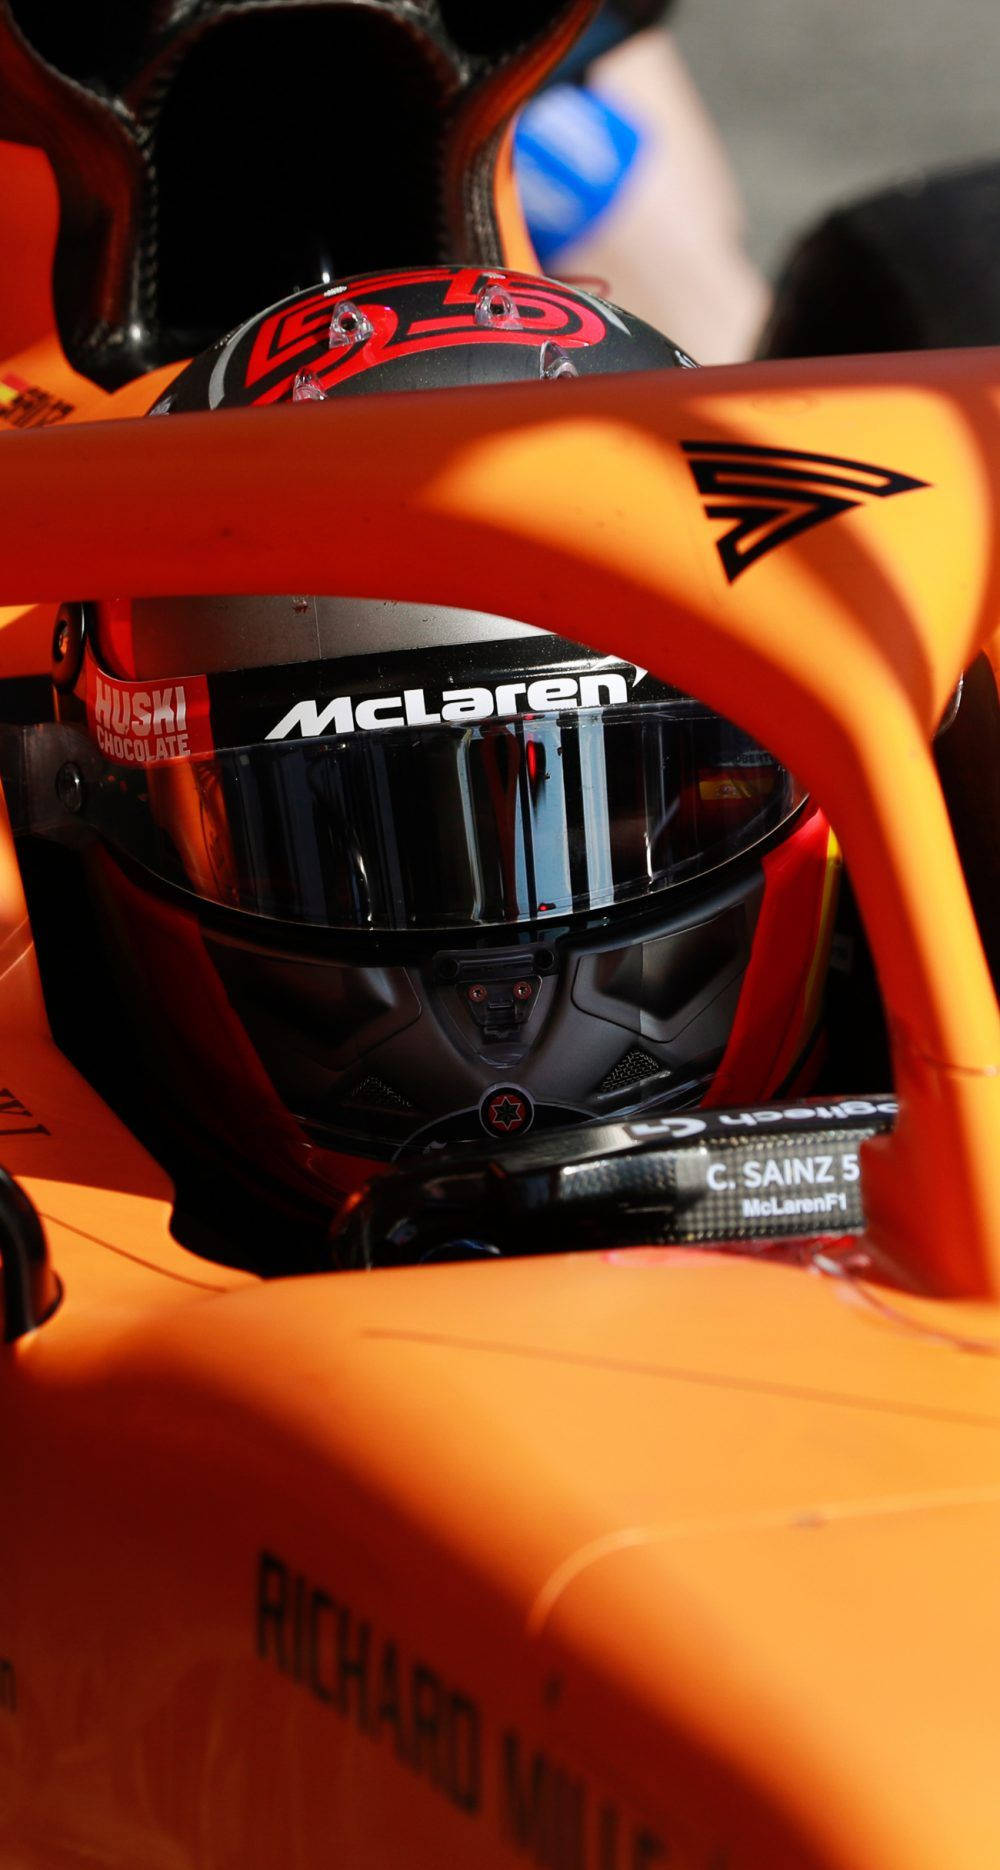 F1 Star Daniel Ricciardo Equipped With His Helmet In His Racing Vehicle Wallpaper